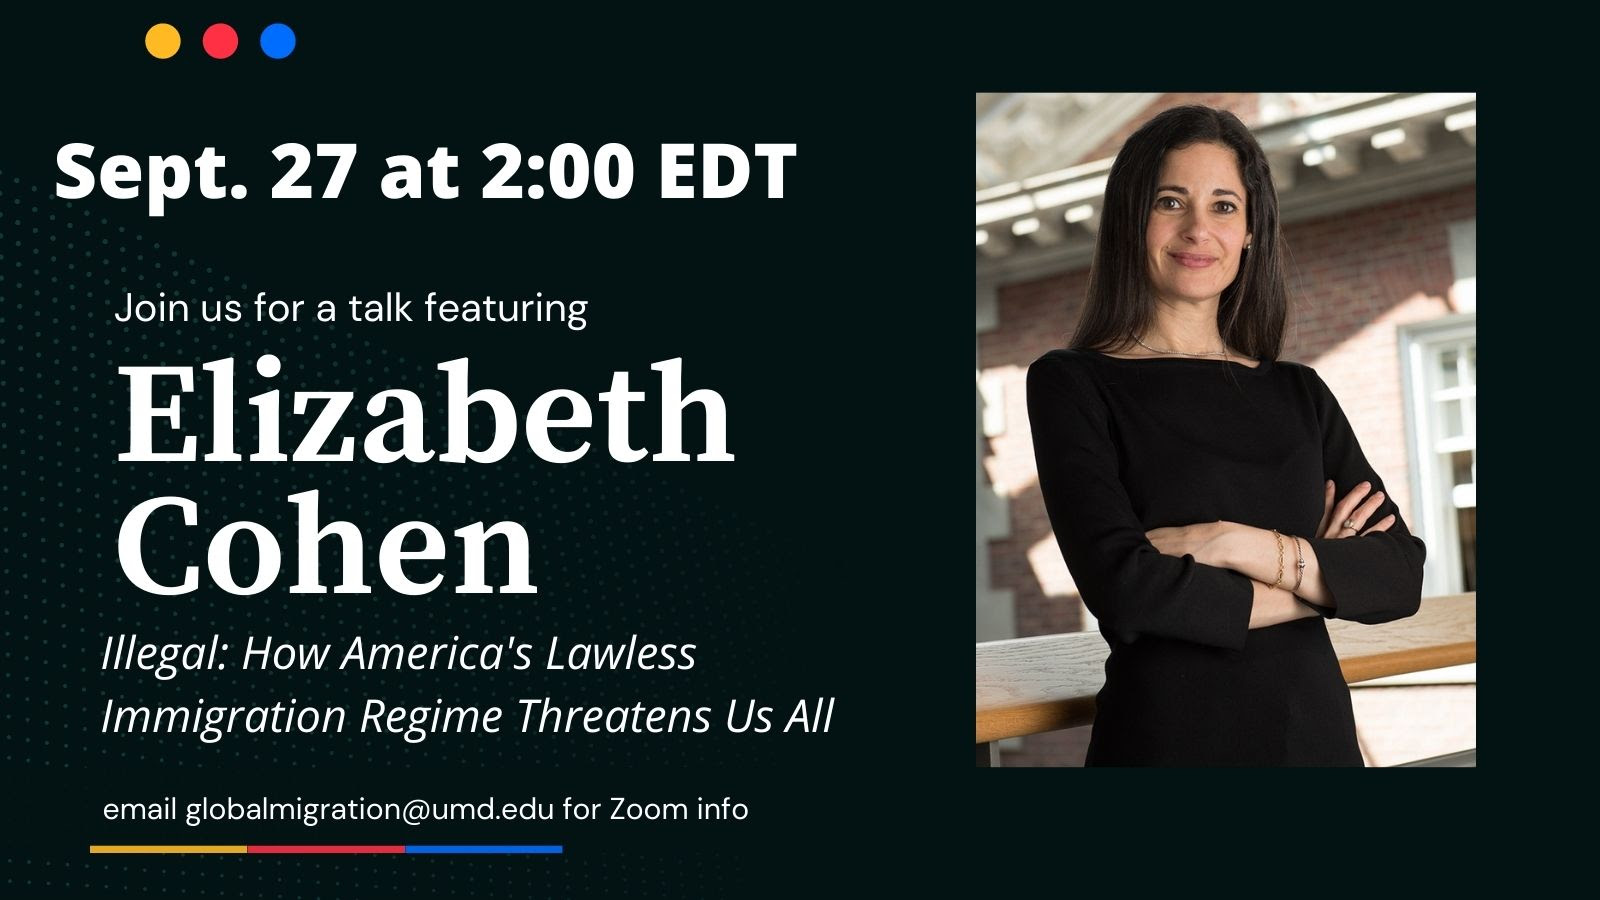 Event details are repeated with a photo of Elizabeth Cohen in black with crossed arms 